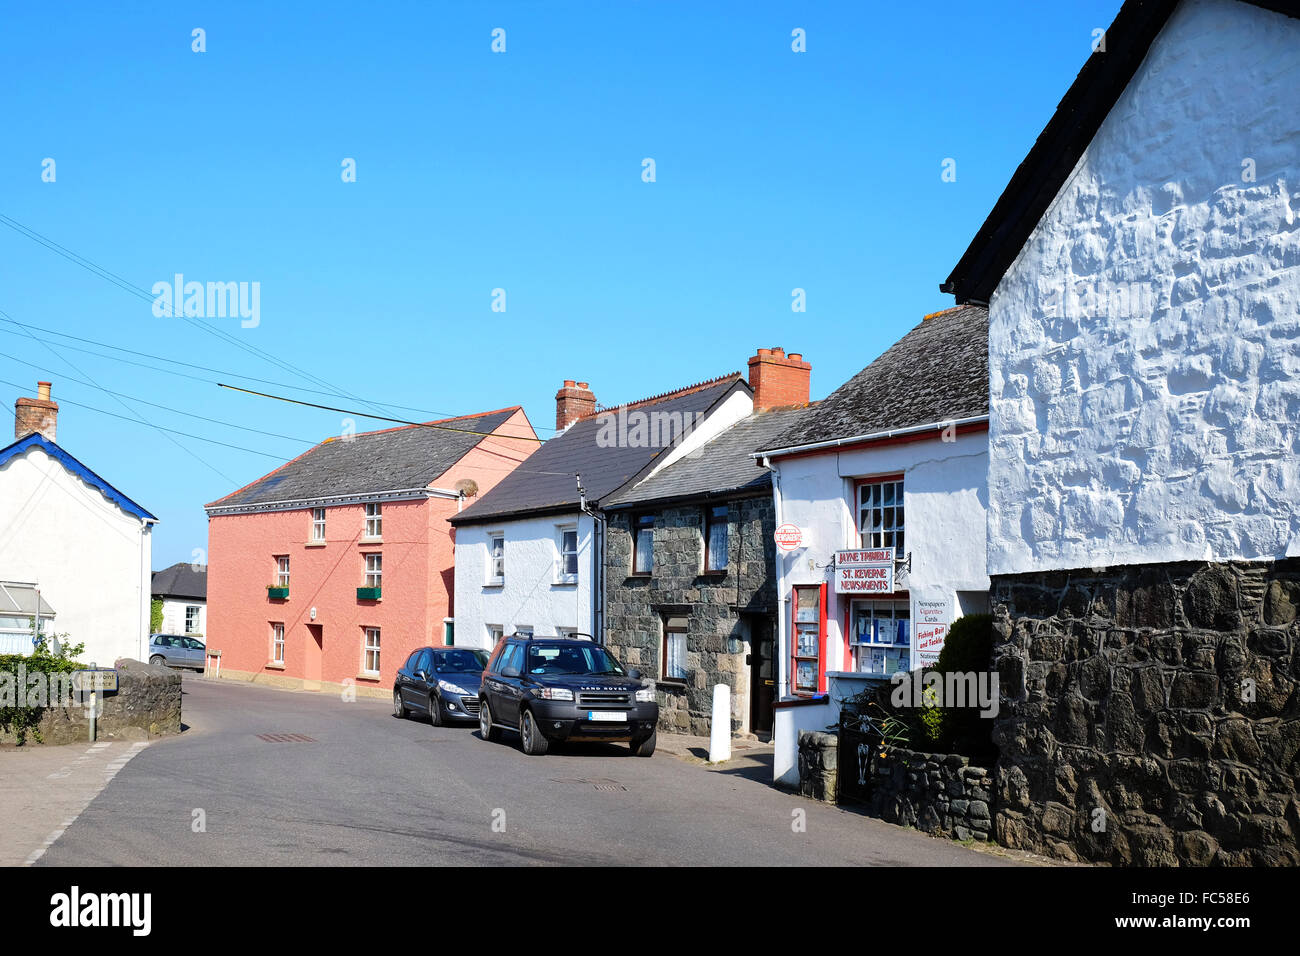 Village street at St.Keverne in Cornwall, England, UK Stock Photo